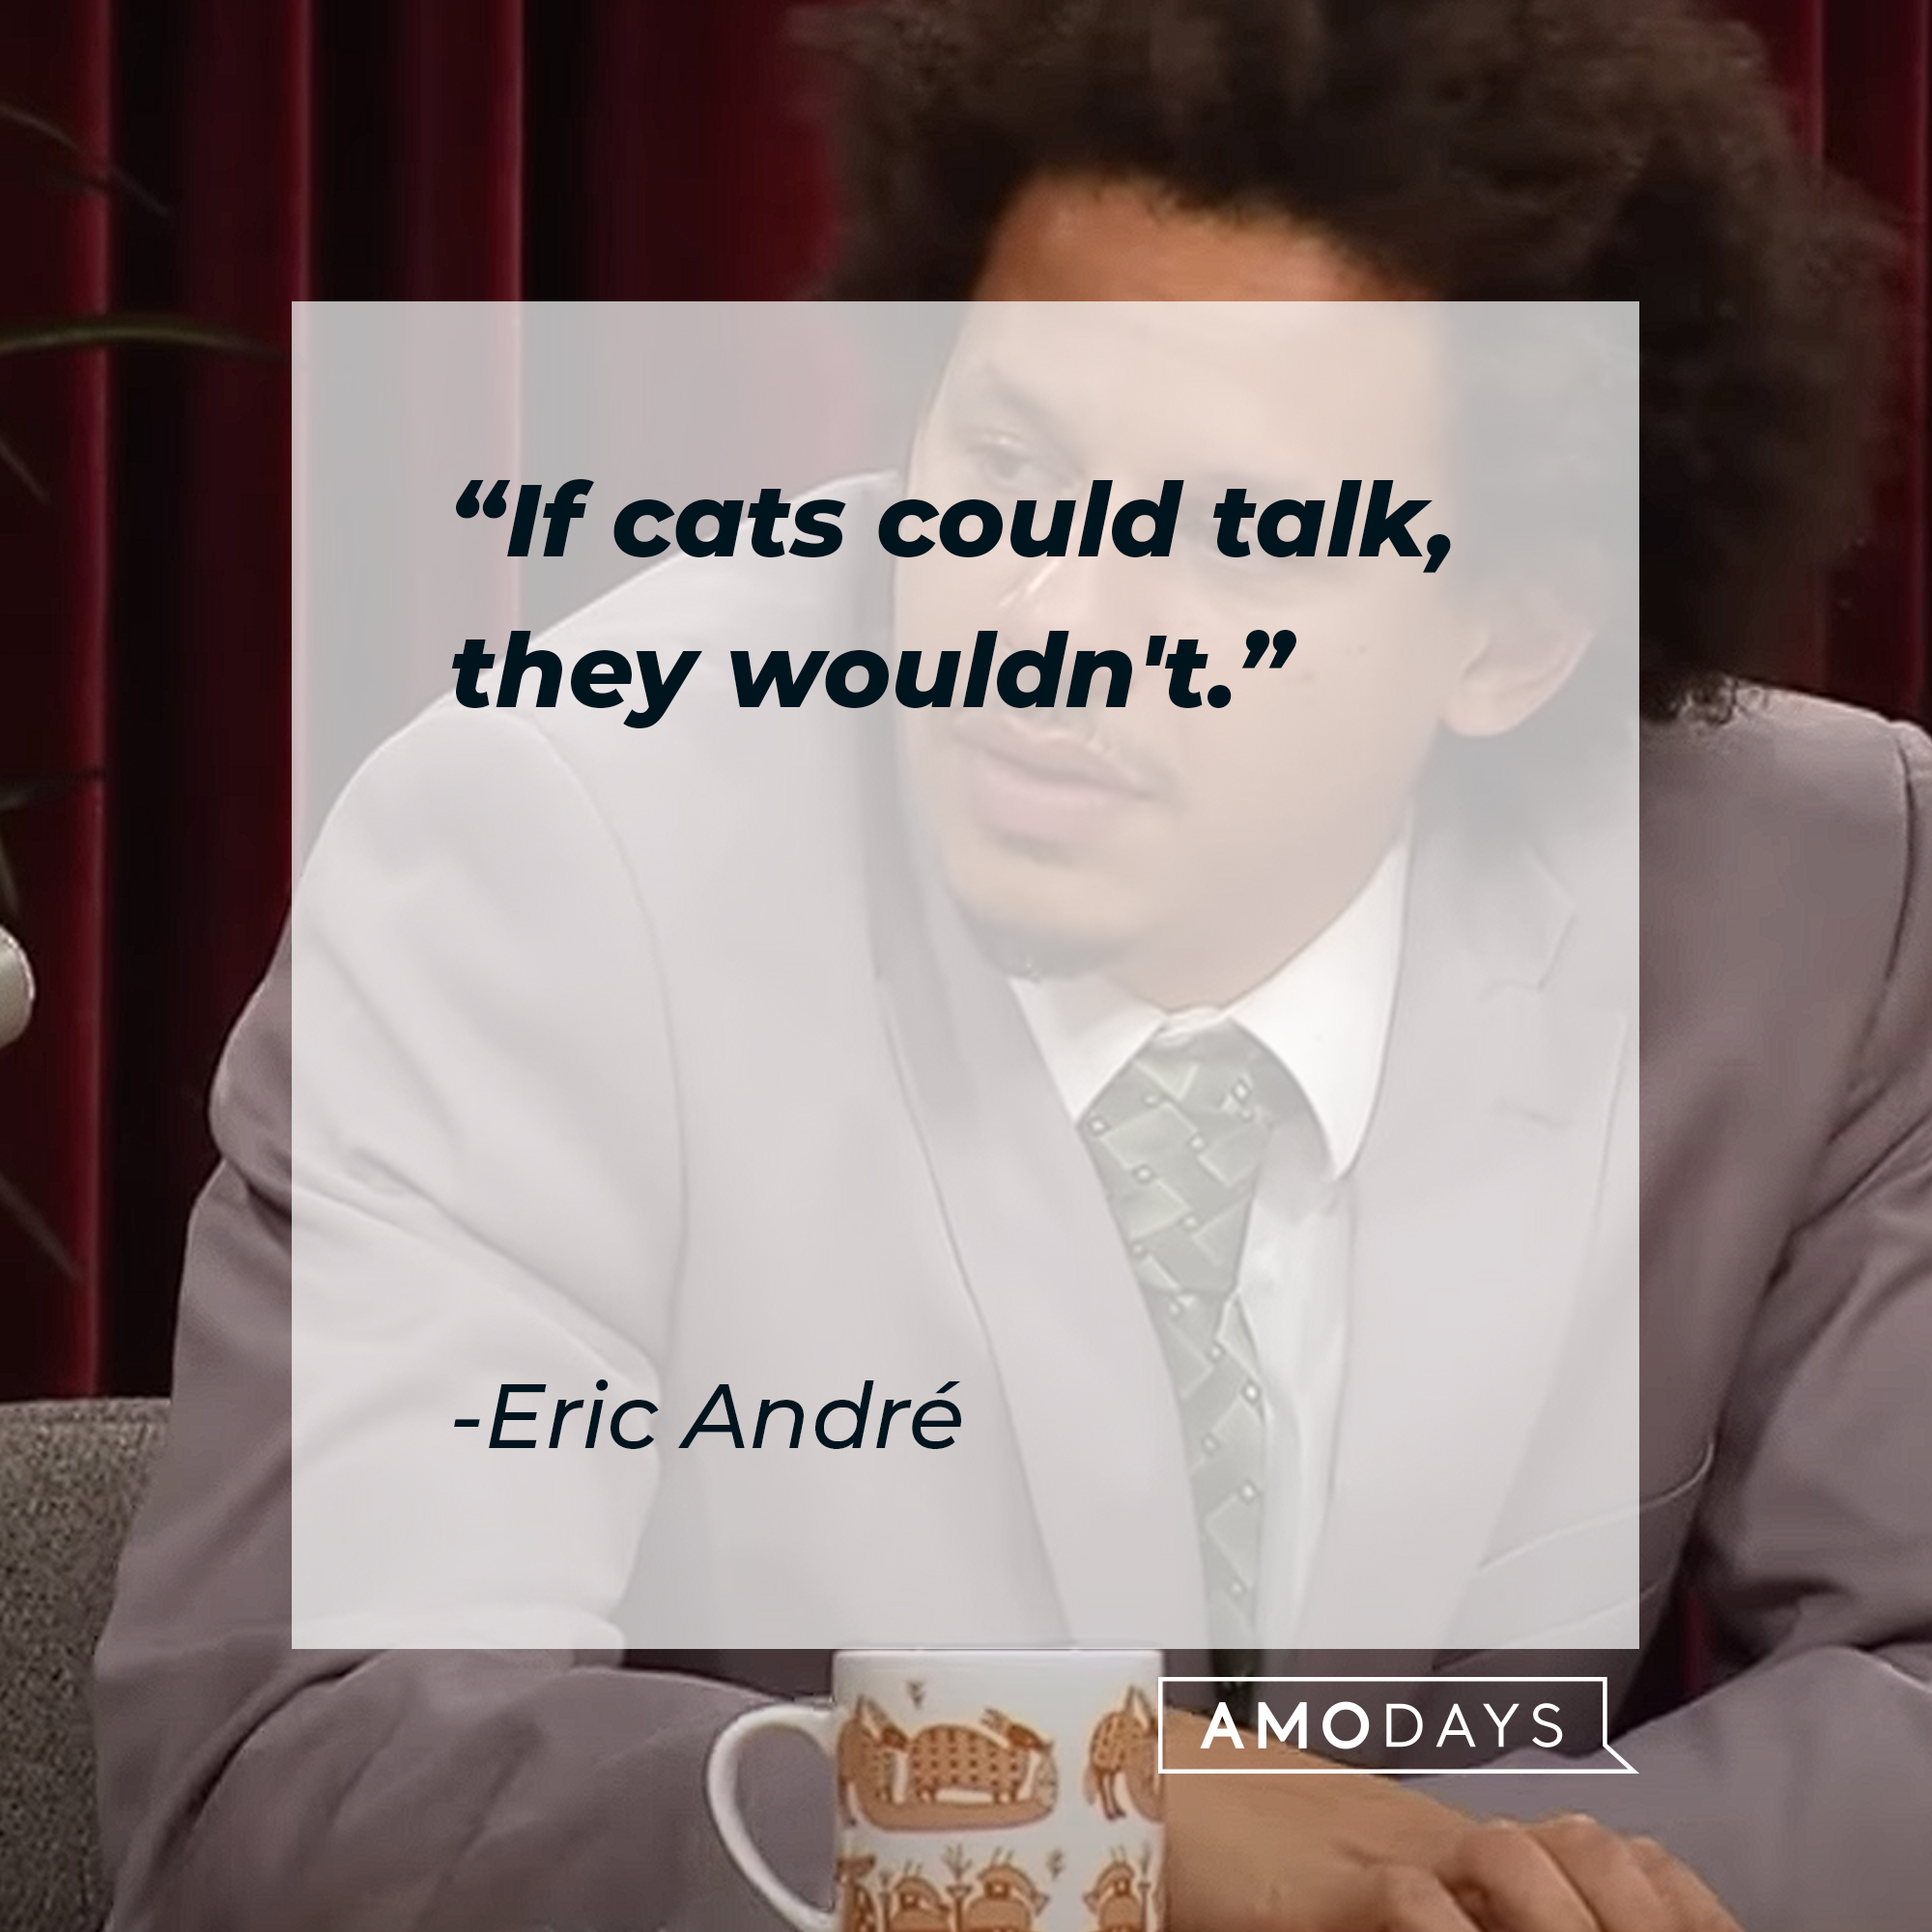 Eric André's quote: "If cats could talk, they wouldn't." | Source: Youtube.com/adultswim